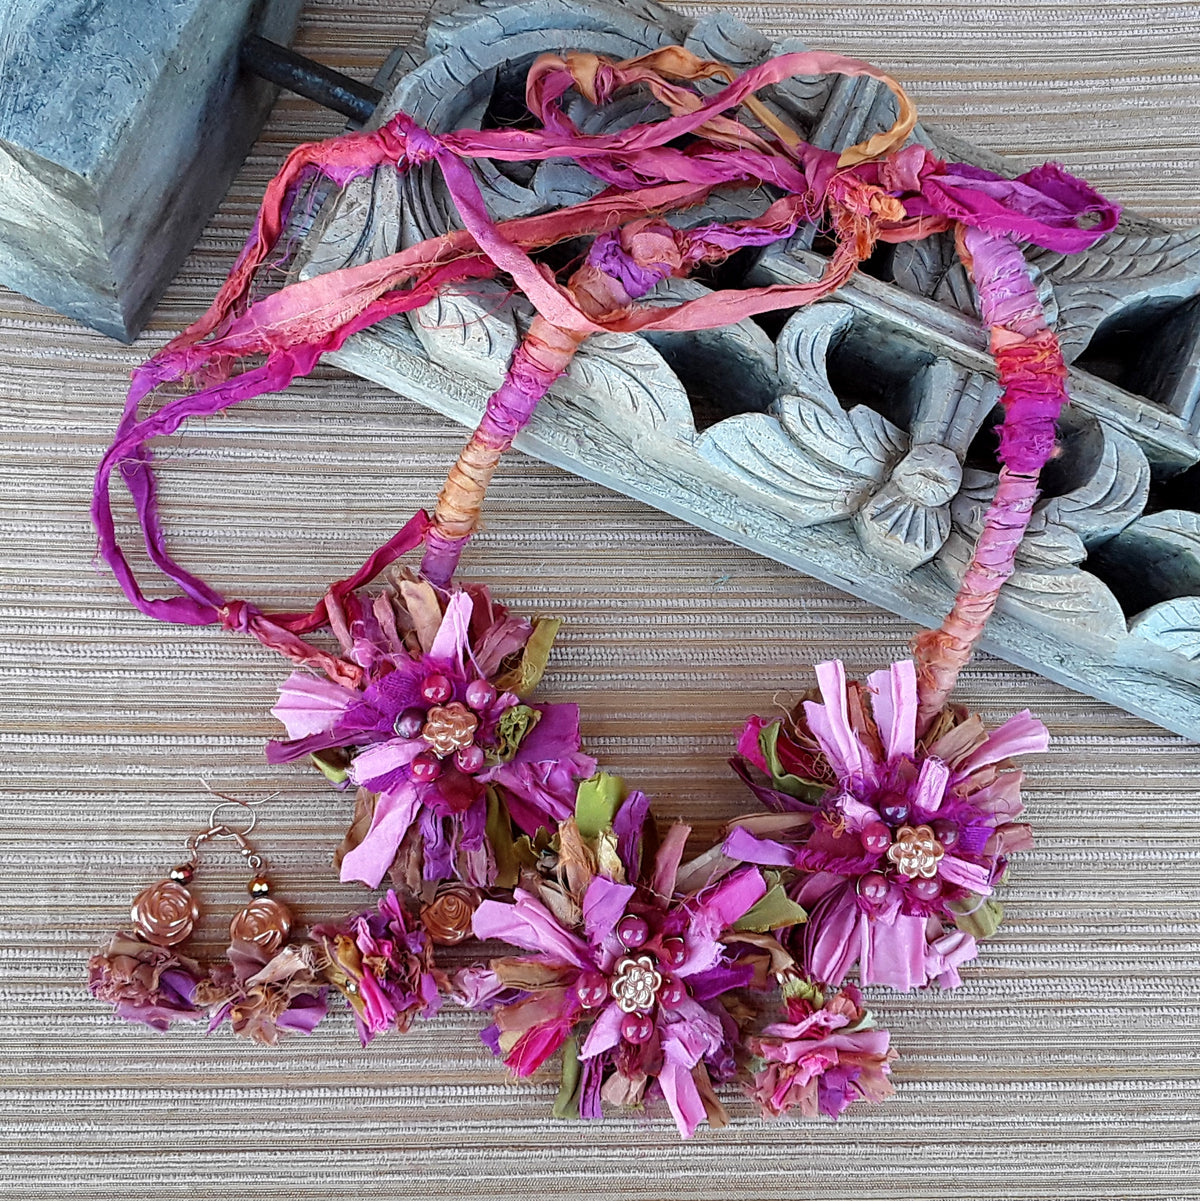 Mauve Boho Sari Silk Flower Statement Necklace - Unique Colorful Fabric Jewelry Gift for Her